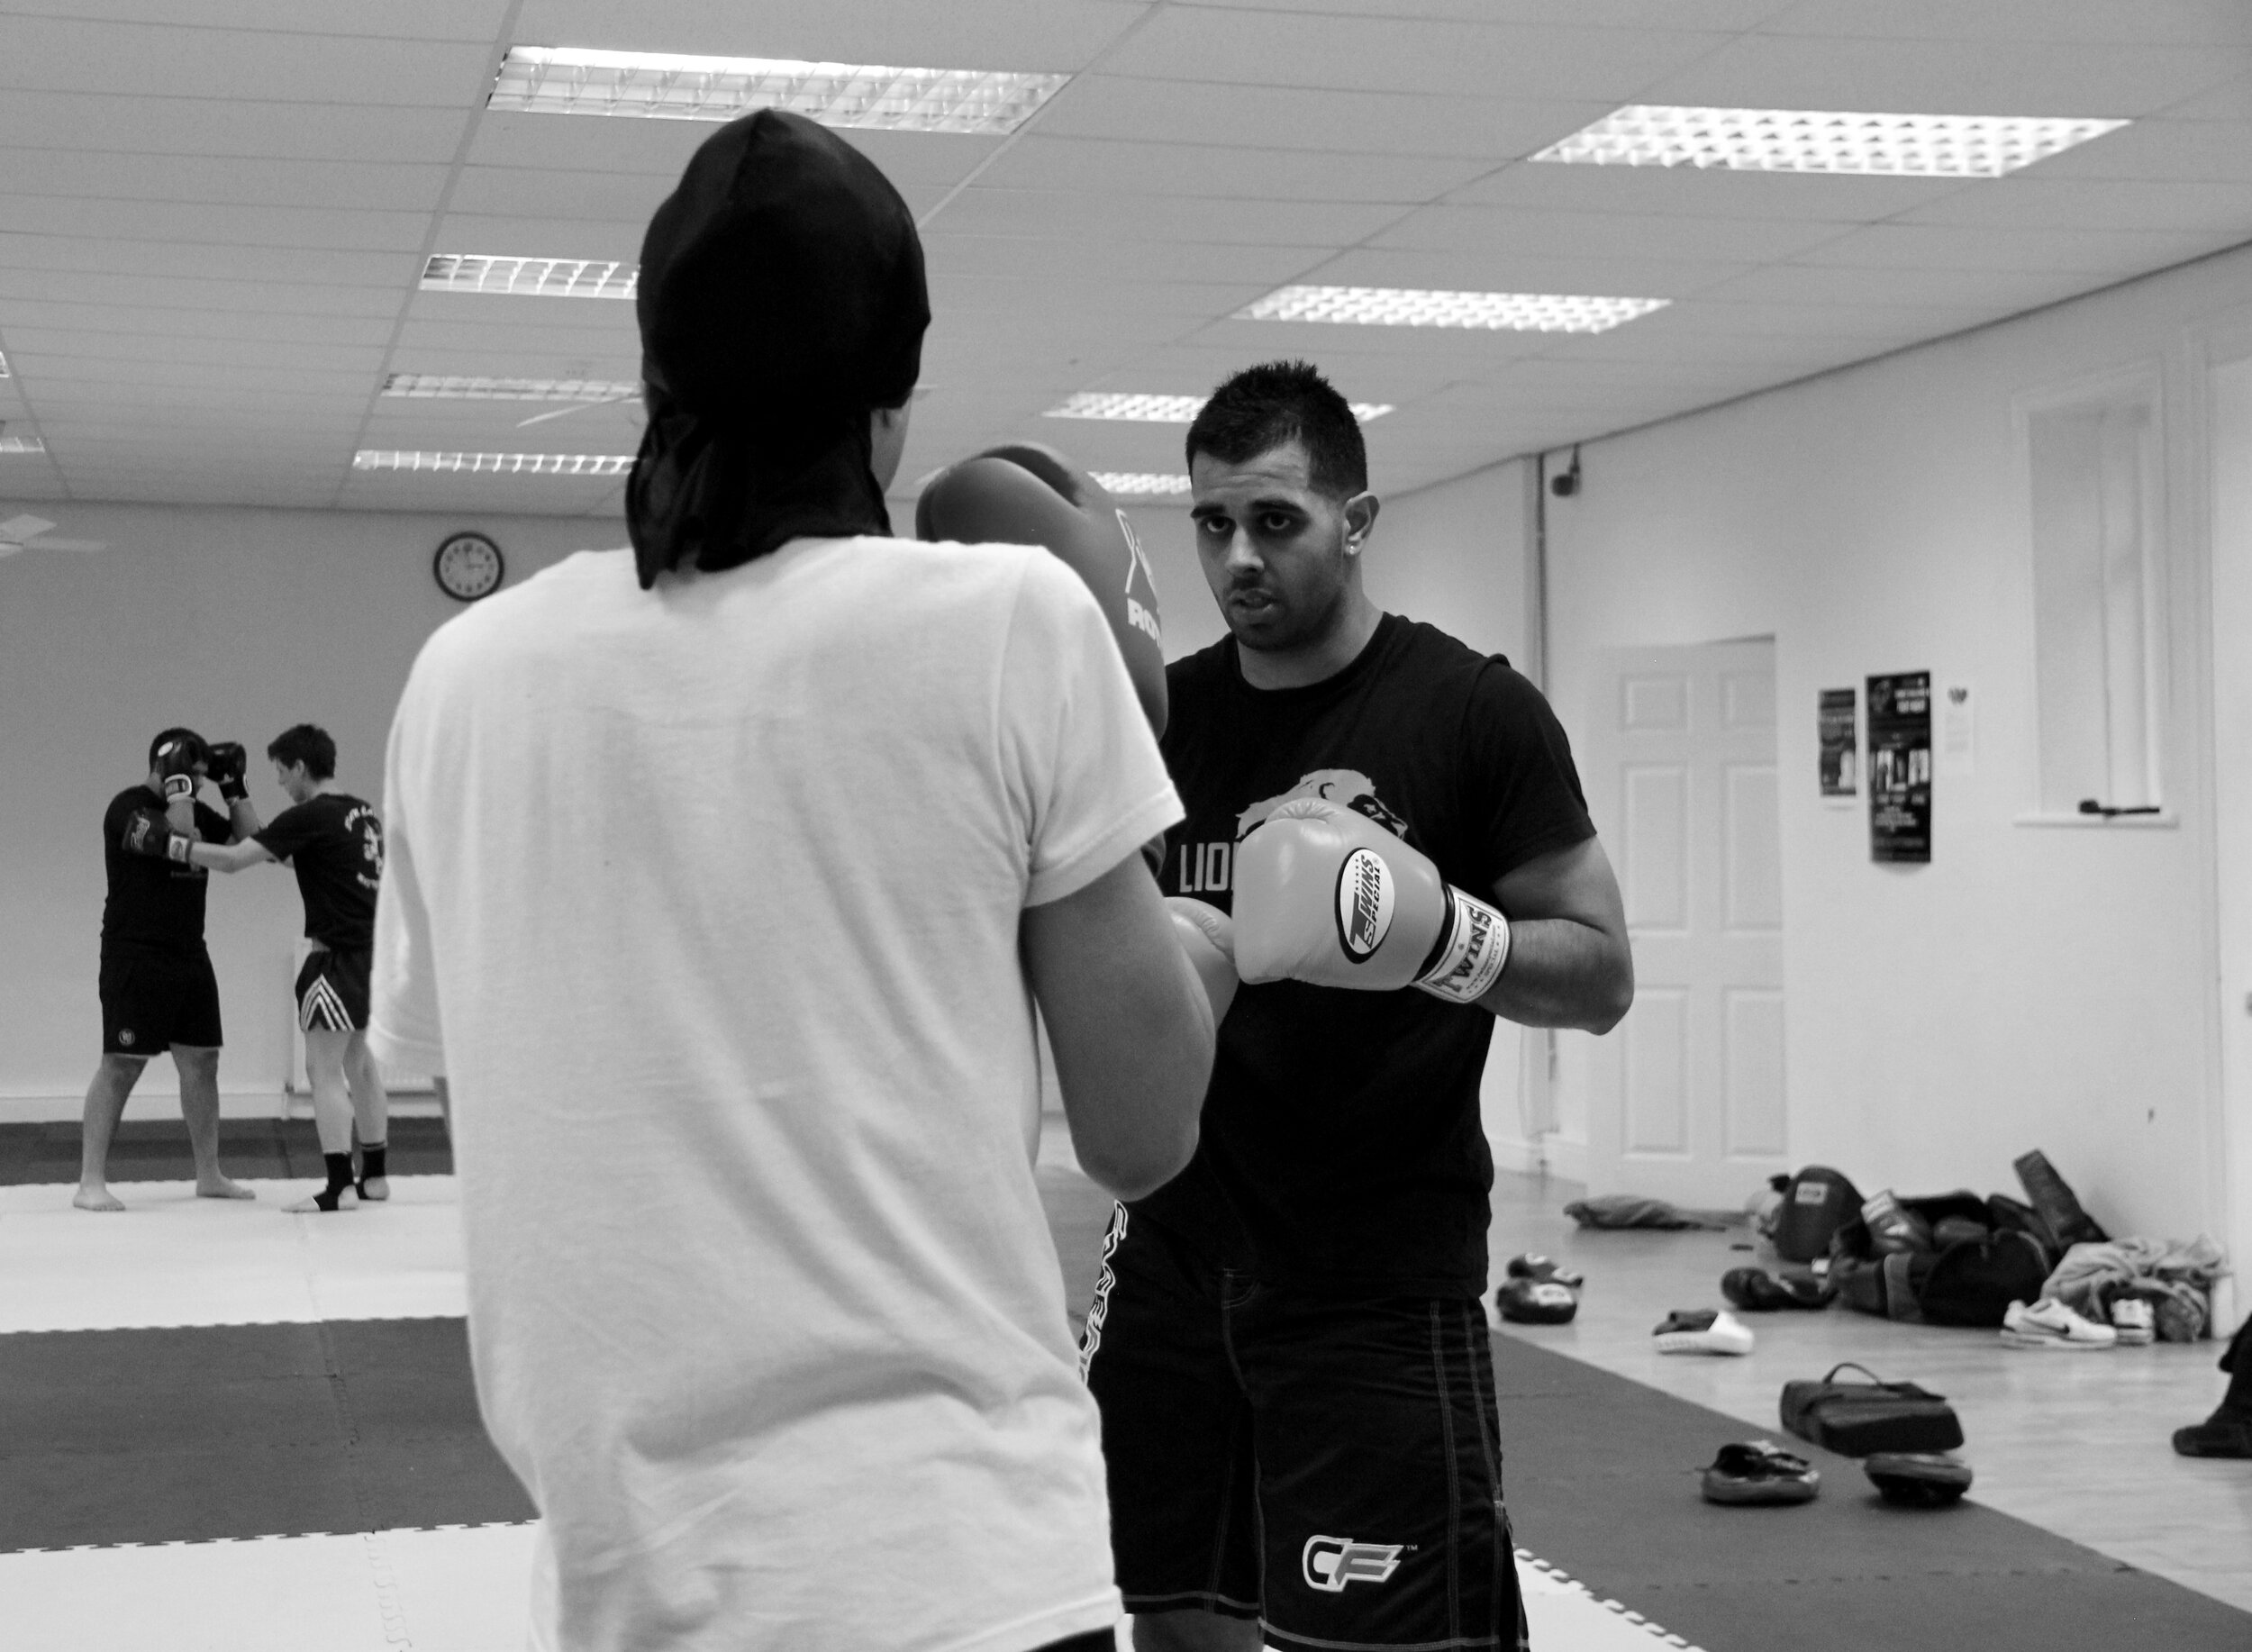 Lions MMA sparring IMG_5381.JPG